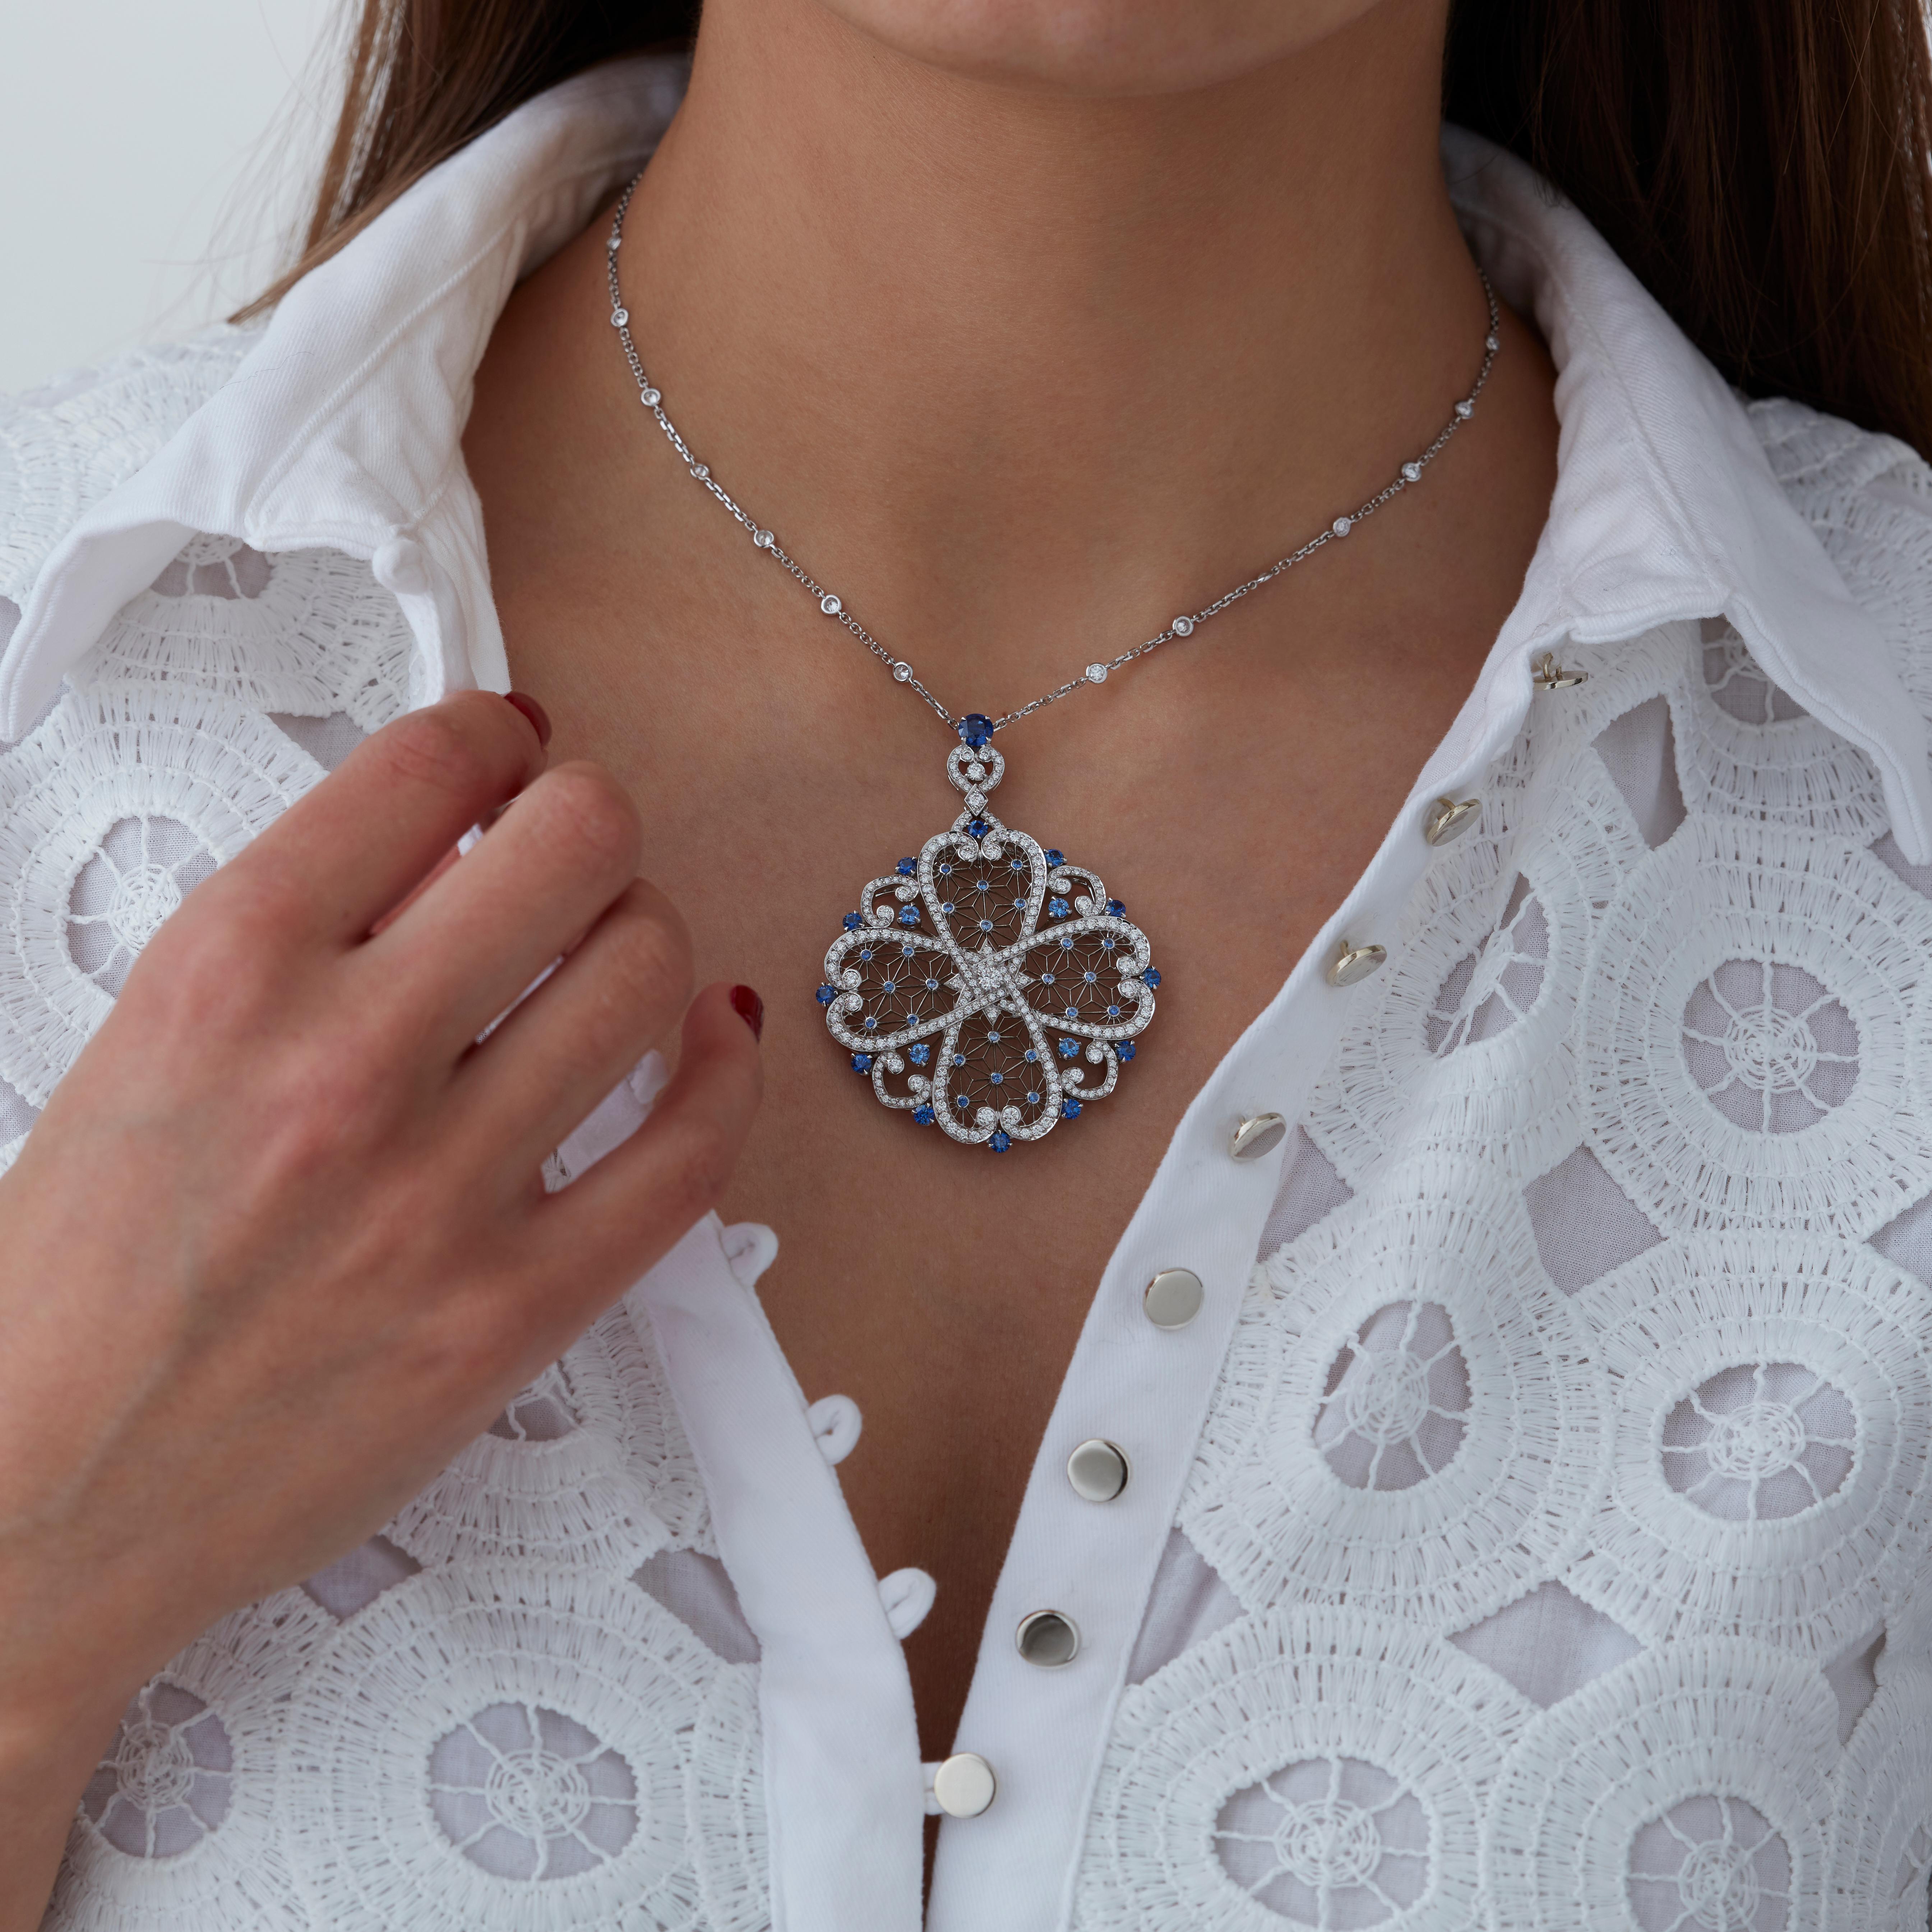 A House of Garrard 18 karat white gold 'Filigree' necklace from the 'Muse' collection, set with round white diamonds and round blue sapphires.                                    
261 round white diamonds weighing: 2.65cts                            